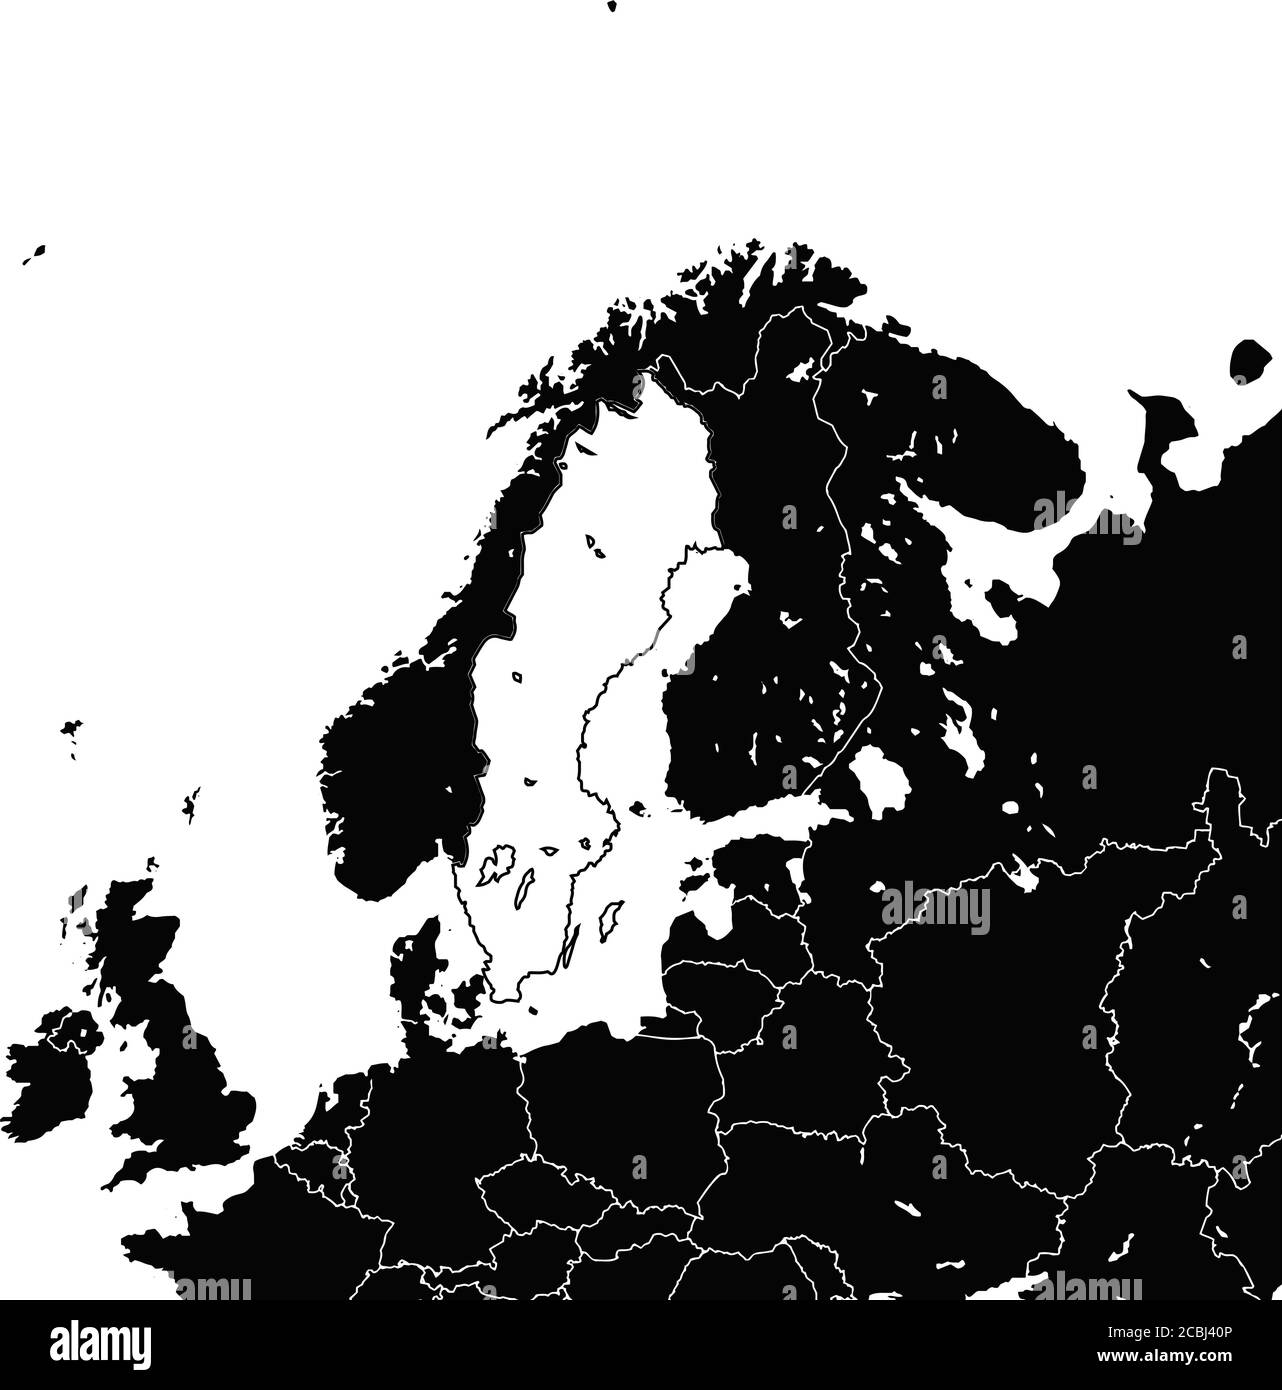 Sweden map. Black and white illustration. Icon sign for print and labelling. Stock Vector